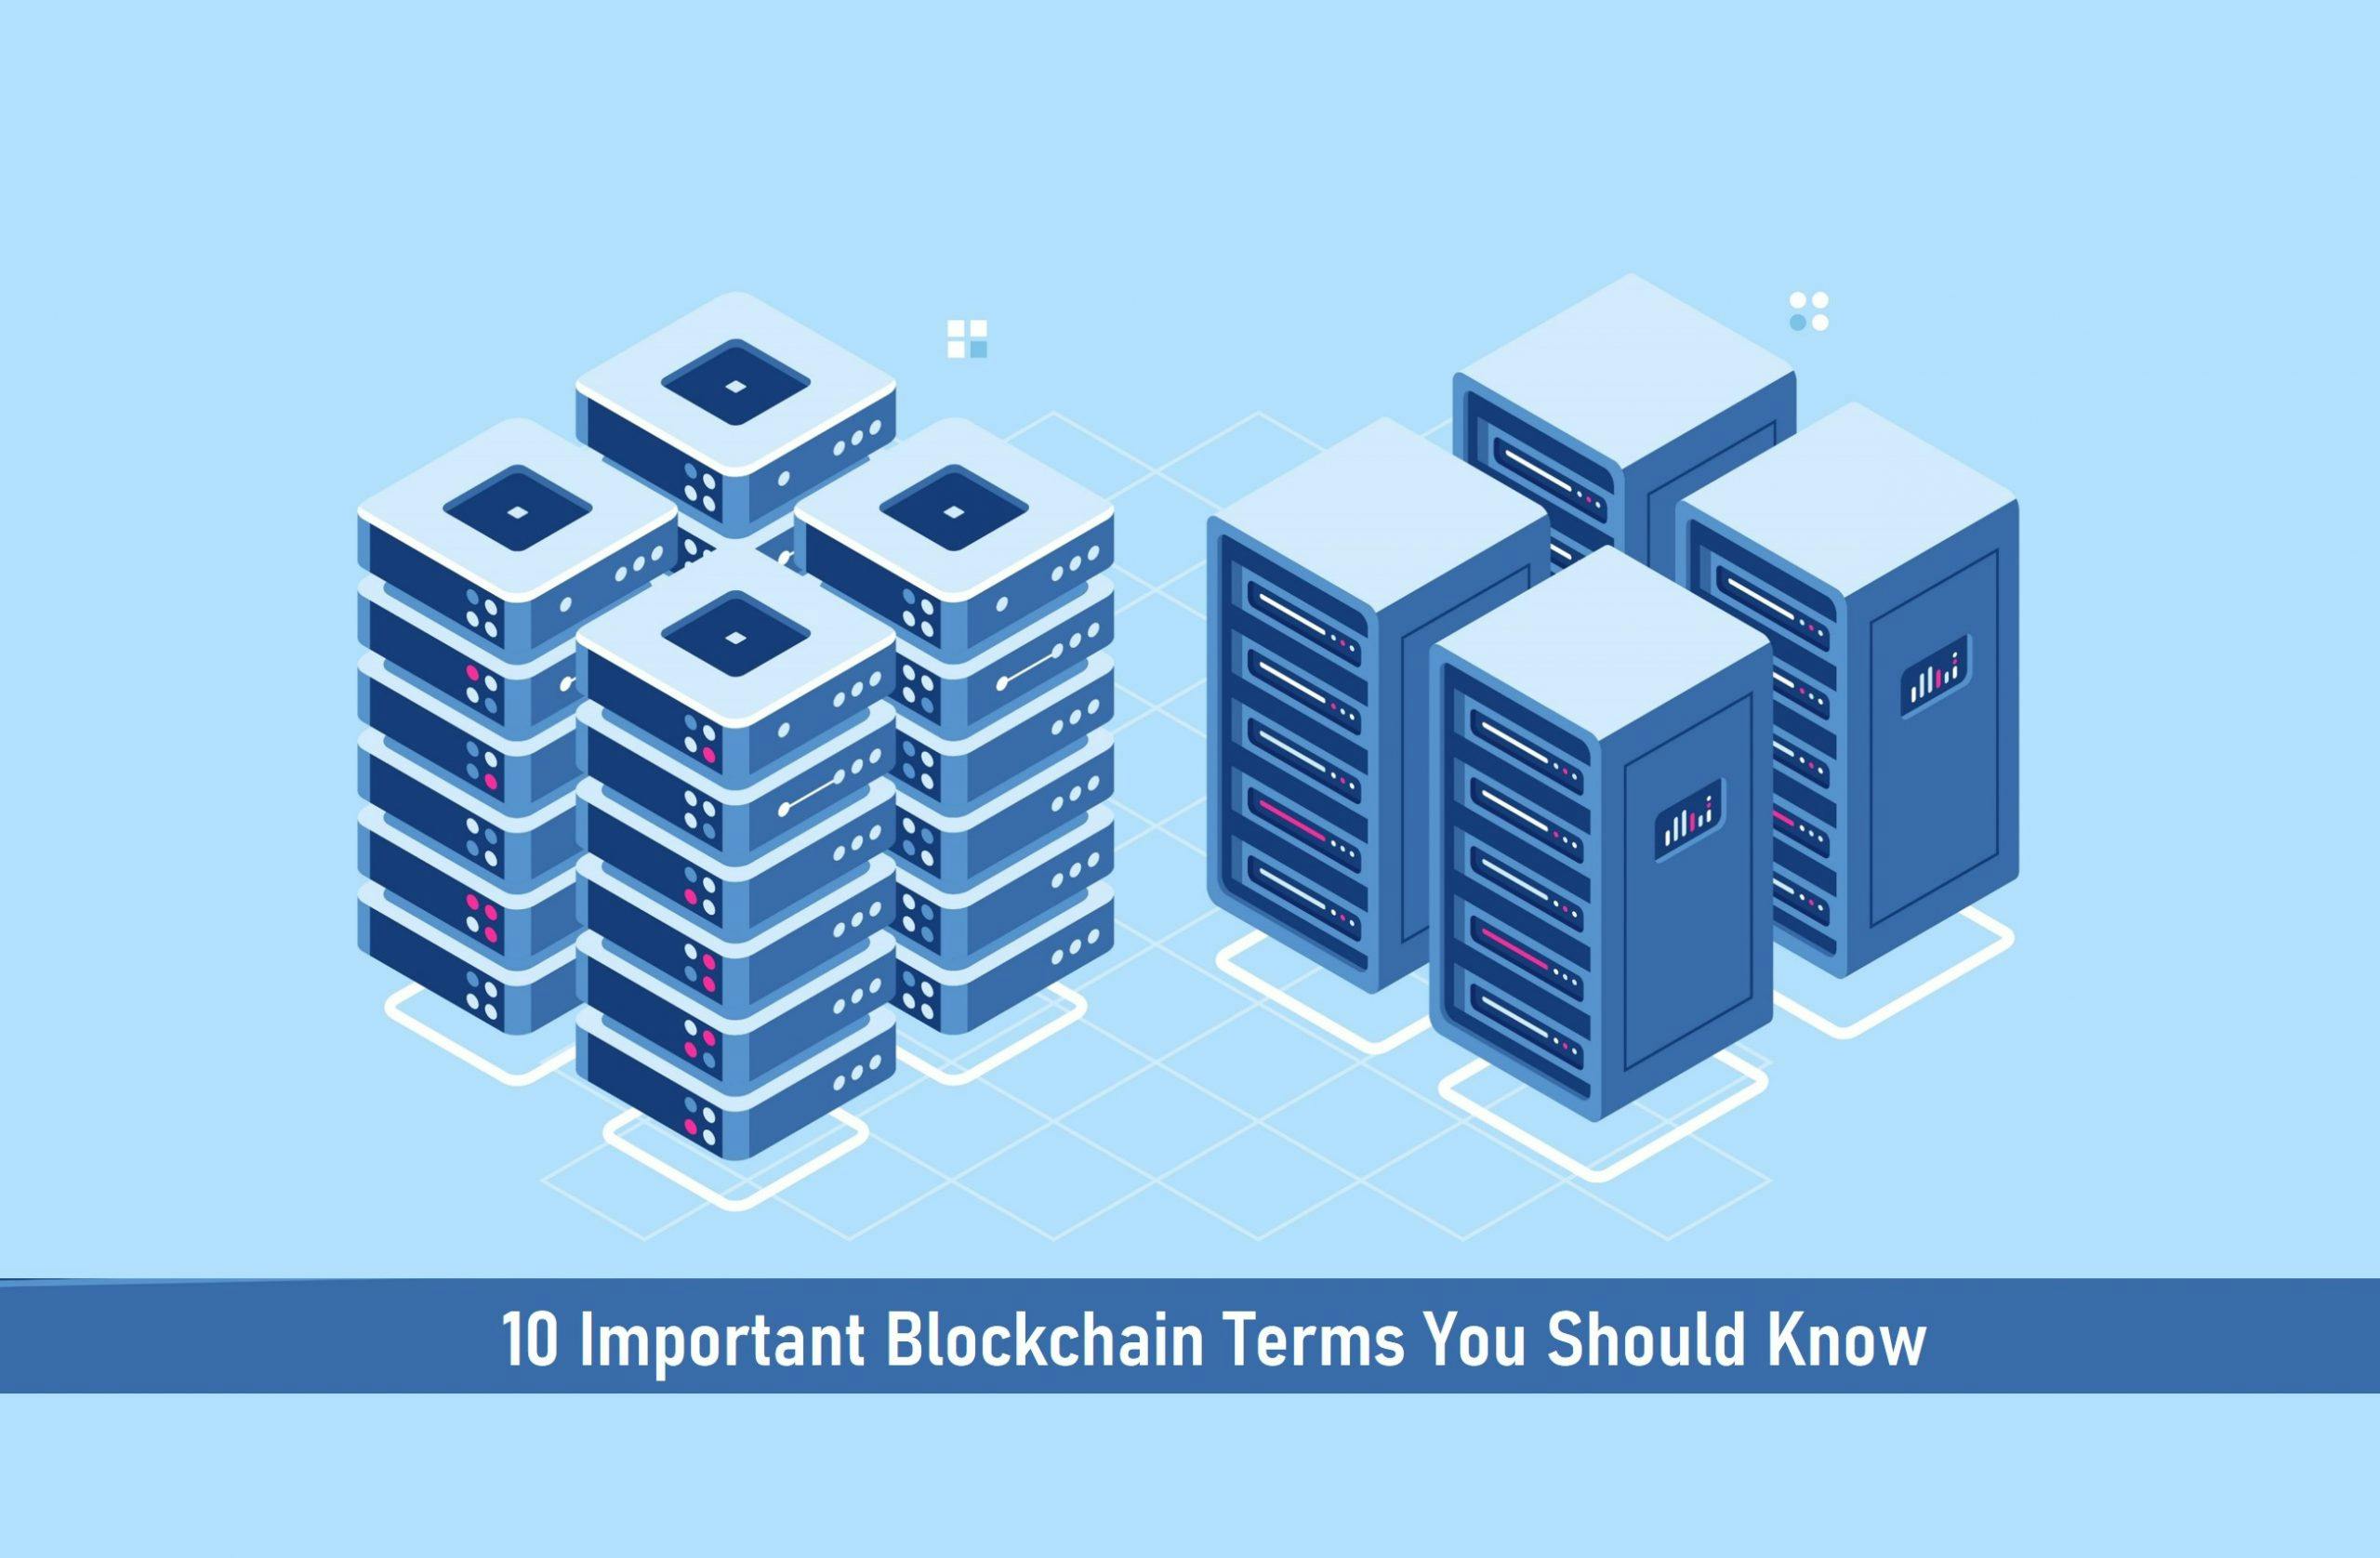 10 Important Blockchain Terms You Should Know